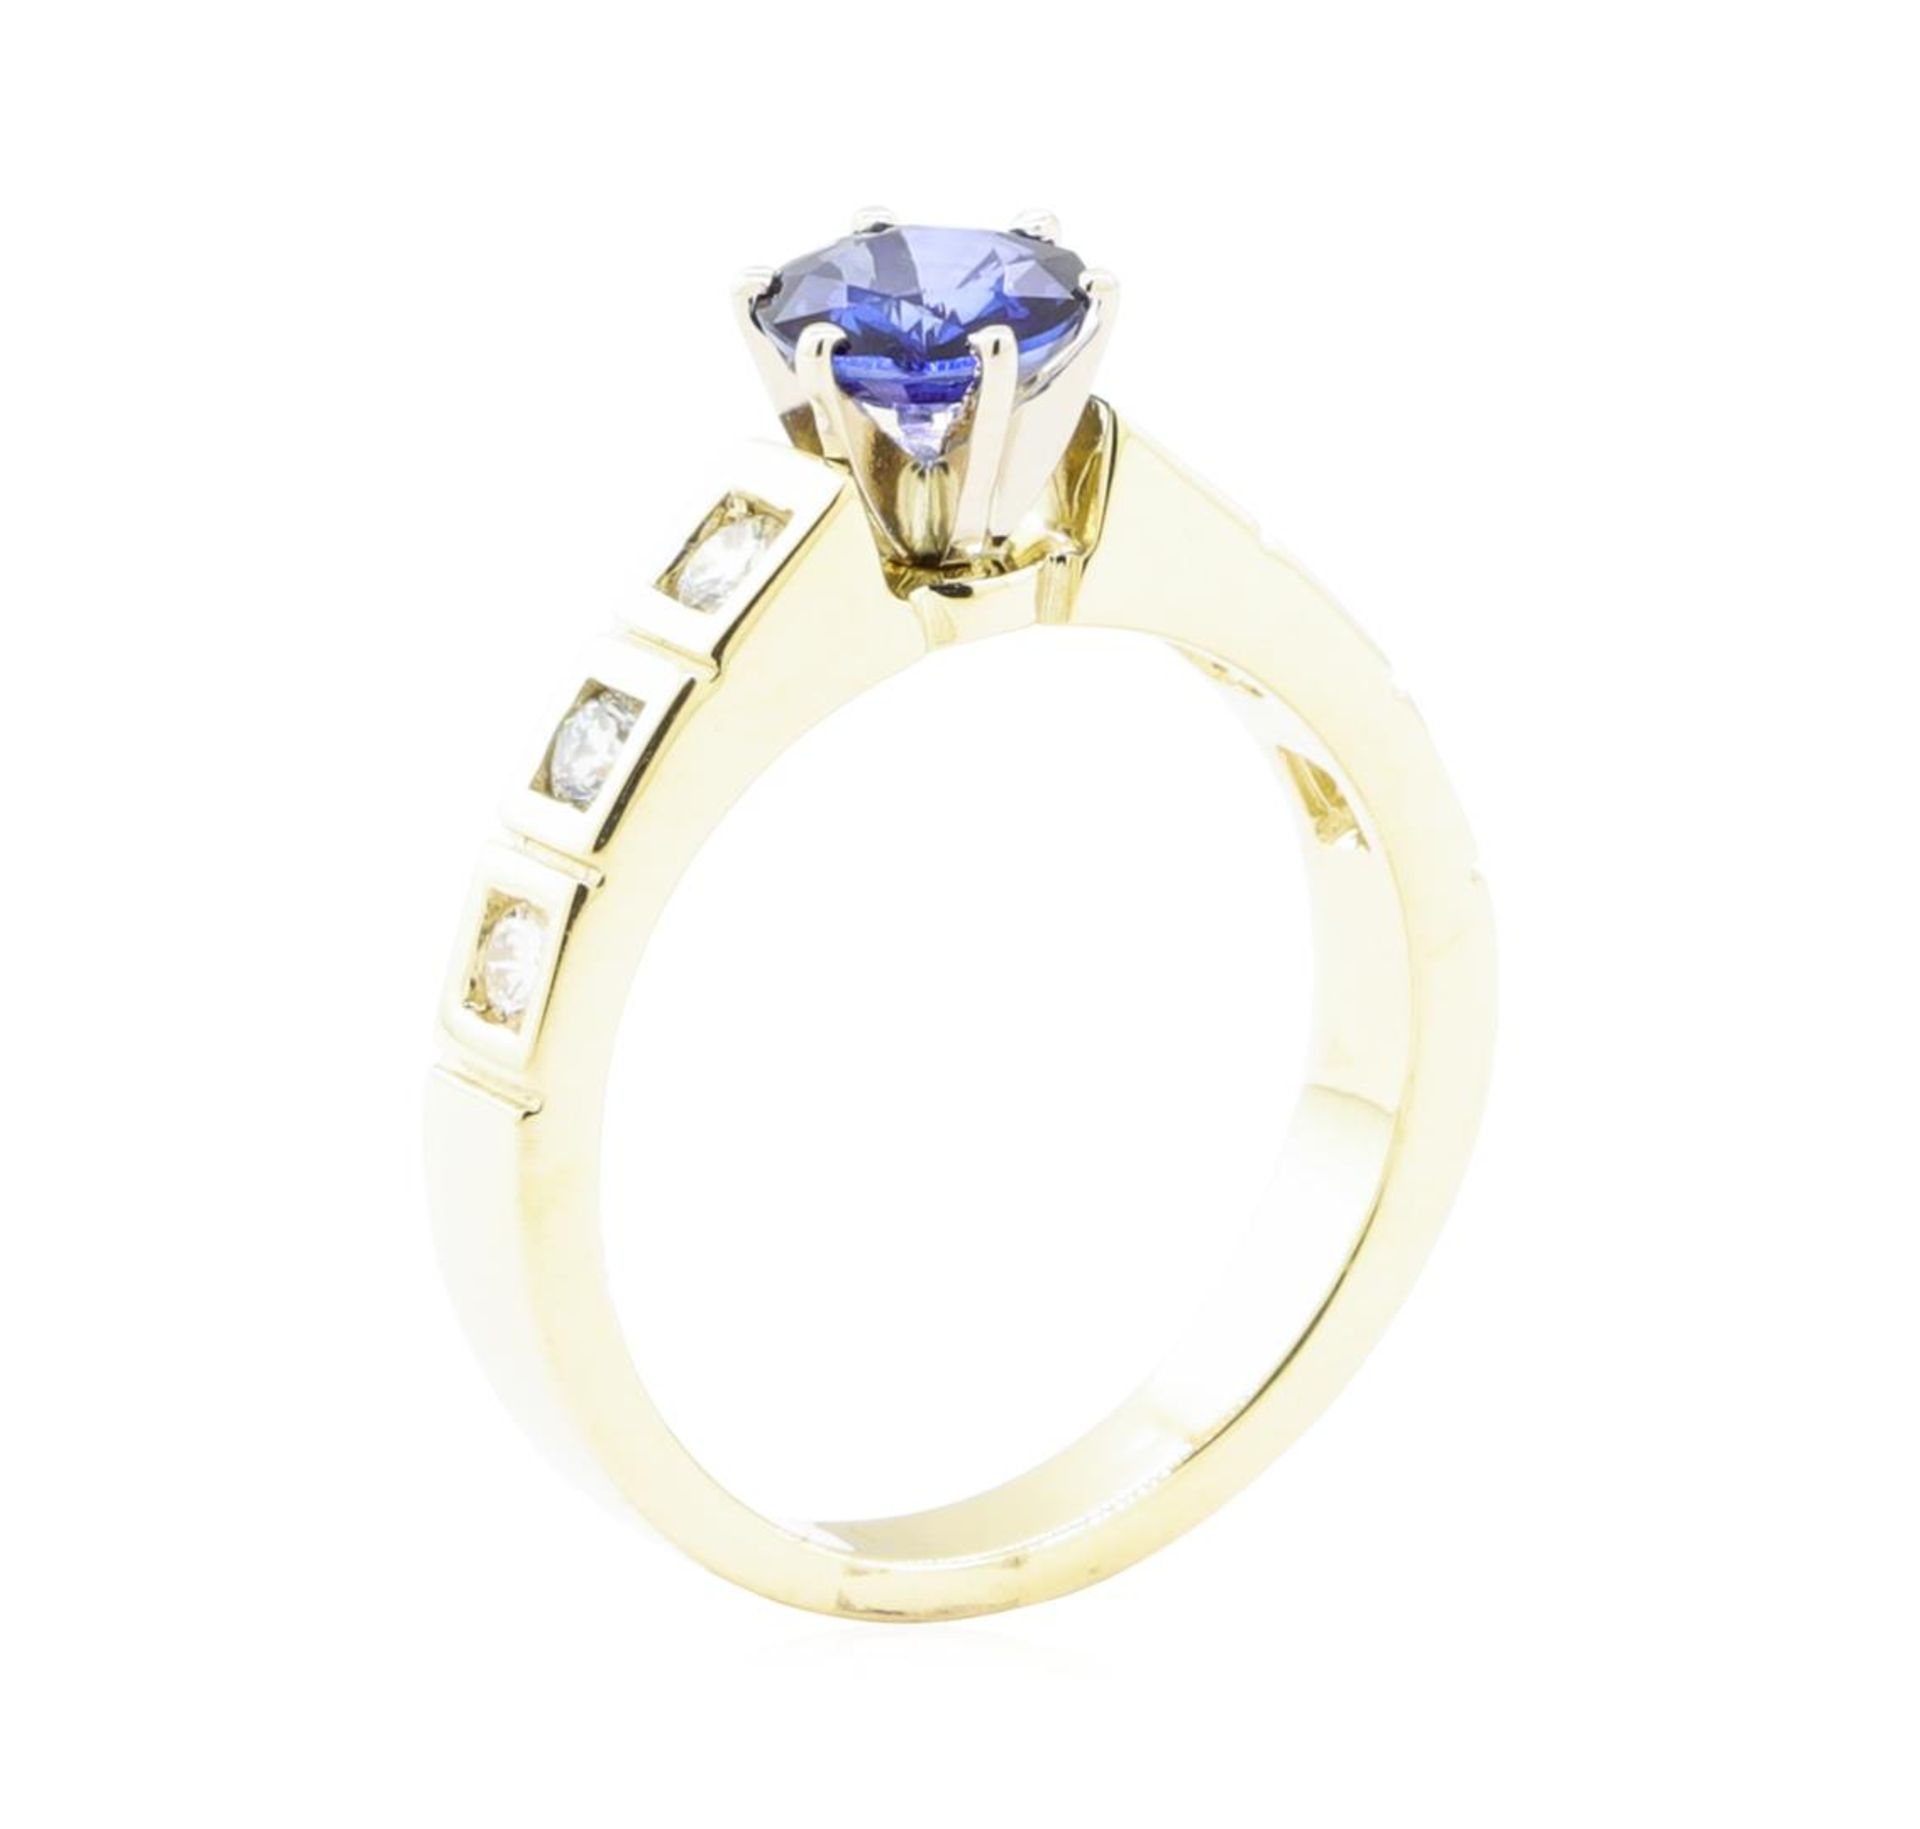 1.34ctw Sapphire and Diamond Ring - 14KT Yellow Gold - Image 4 of 4